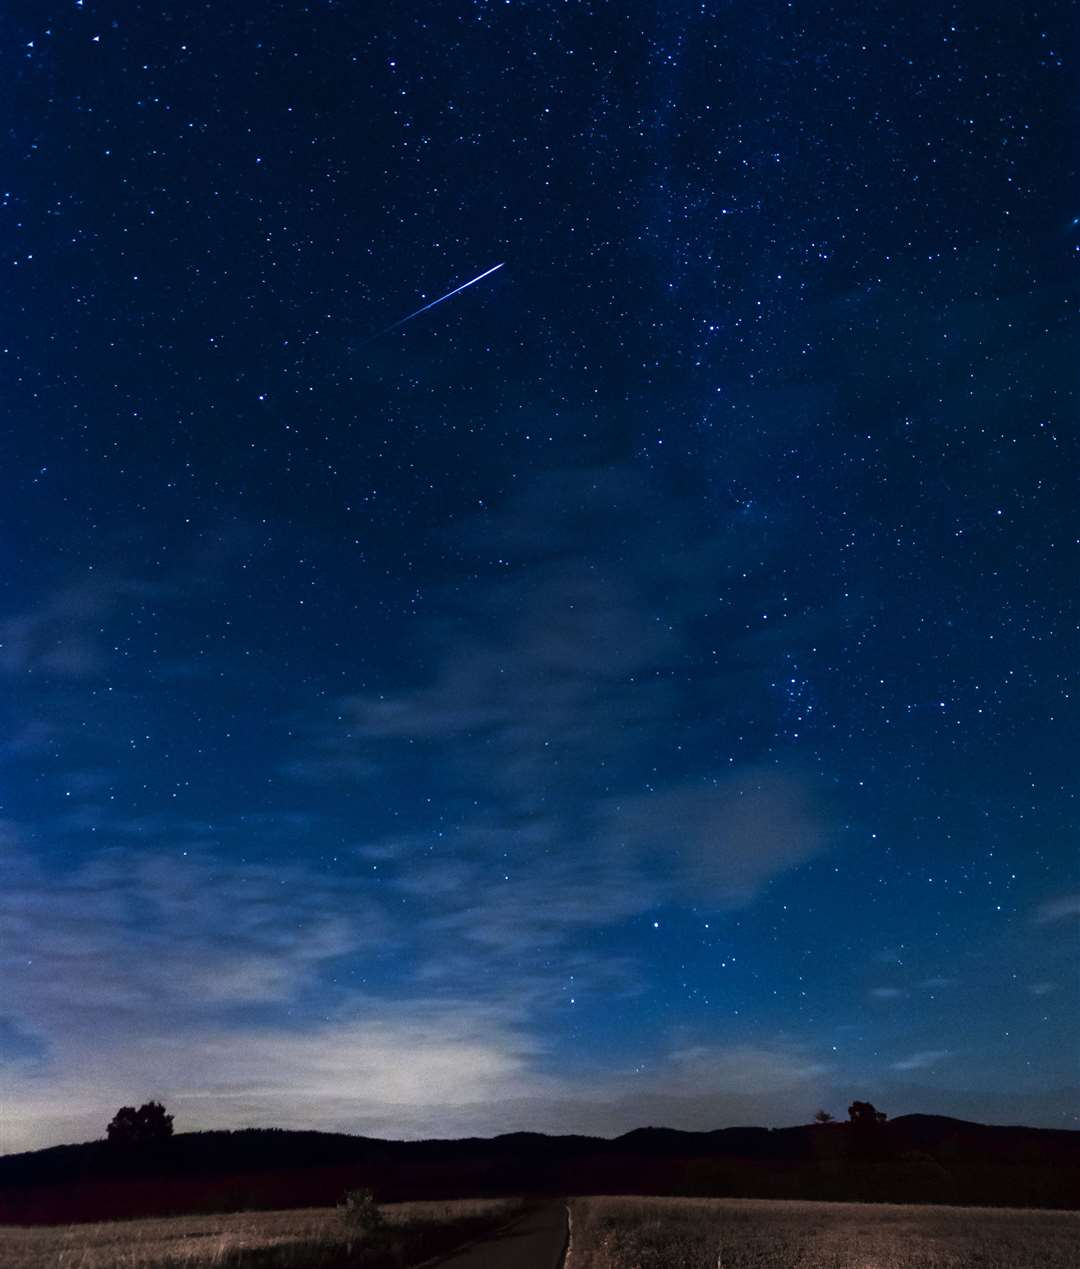 Will you spot a meteor this month? Picture: Jacek Halicki / CC BY-SA (https://creativecommons.org/licenses/by-sa/4.0)